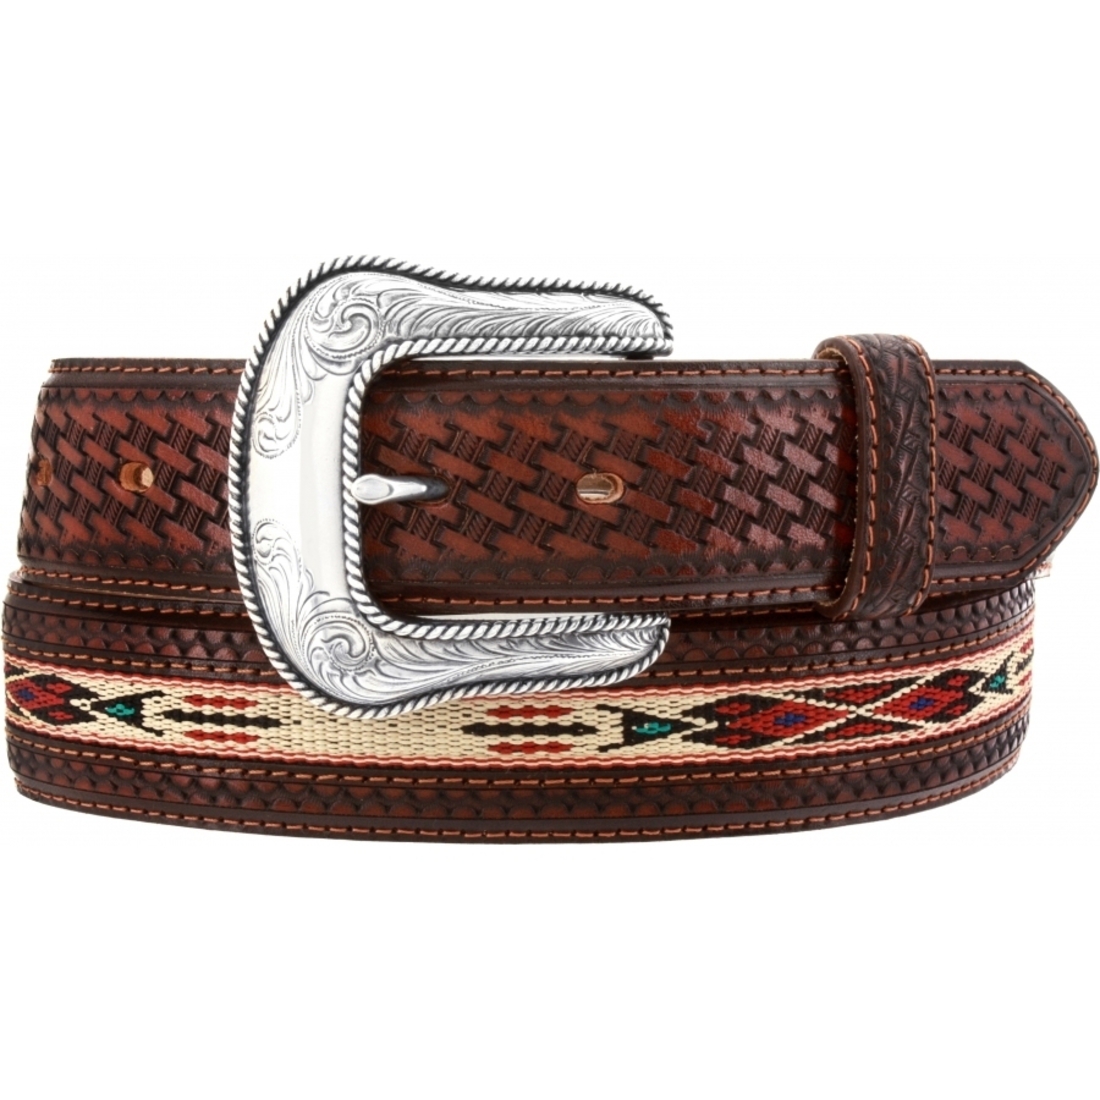 Justin Western Mens Belt Leather Mde In The USA Braided Conchos Brown C13395 | eBay